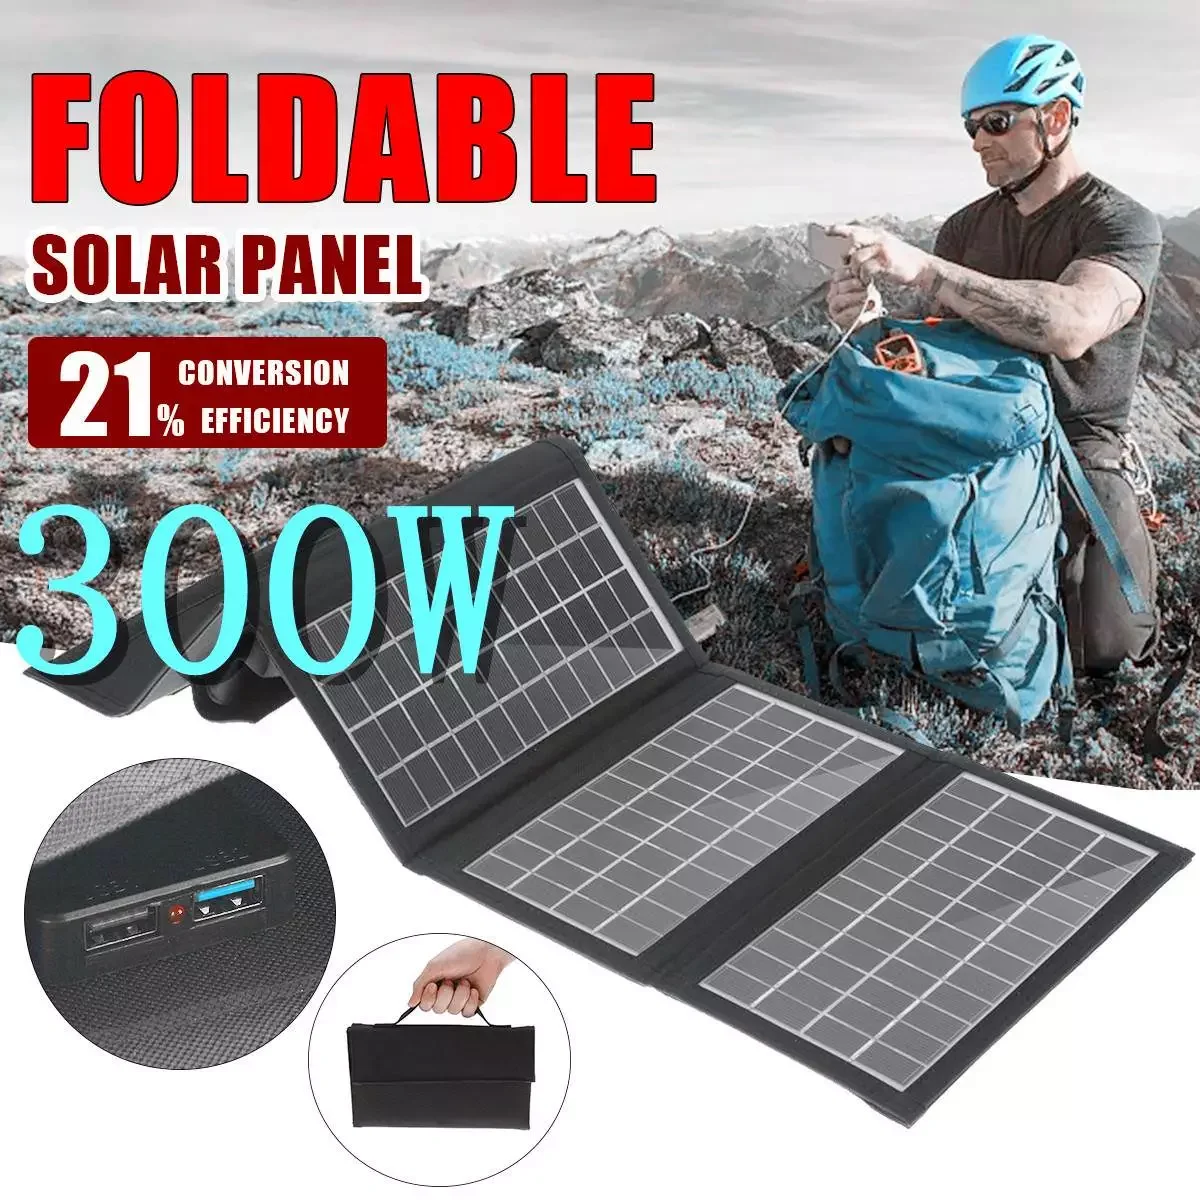 

NEW 320W Sunpower Solar Panels Portable Foldable Solar Panel Waterproof Outdoor Crystalline Solar Cells Charger 670x245 mm